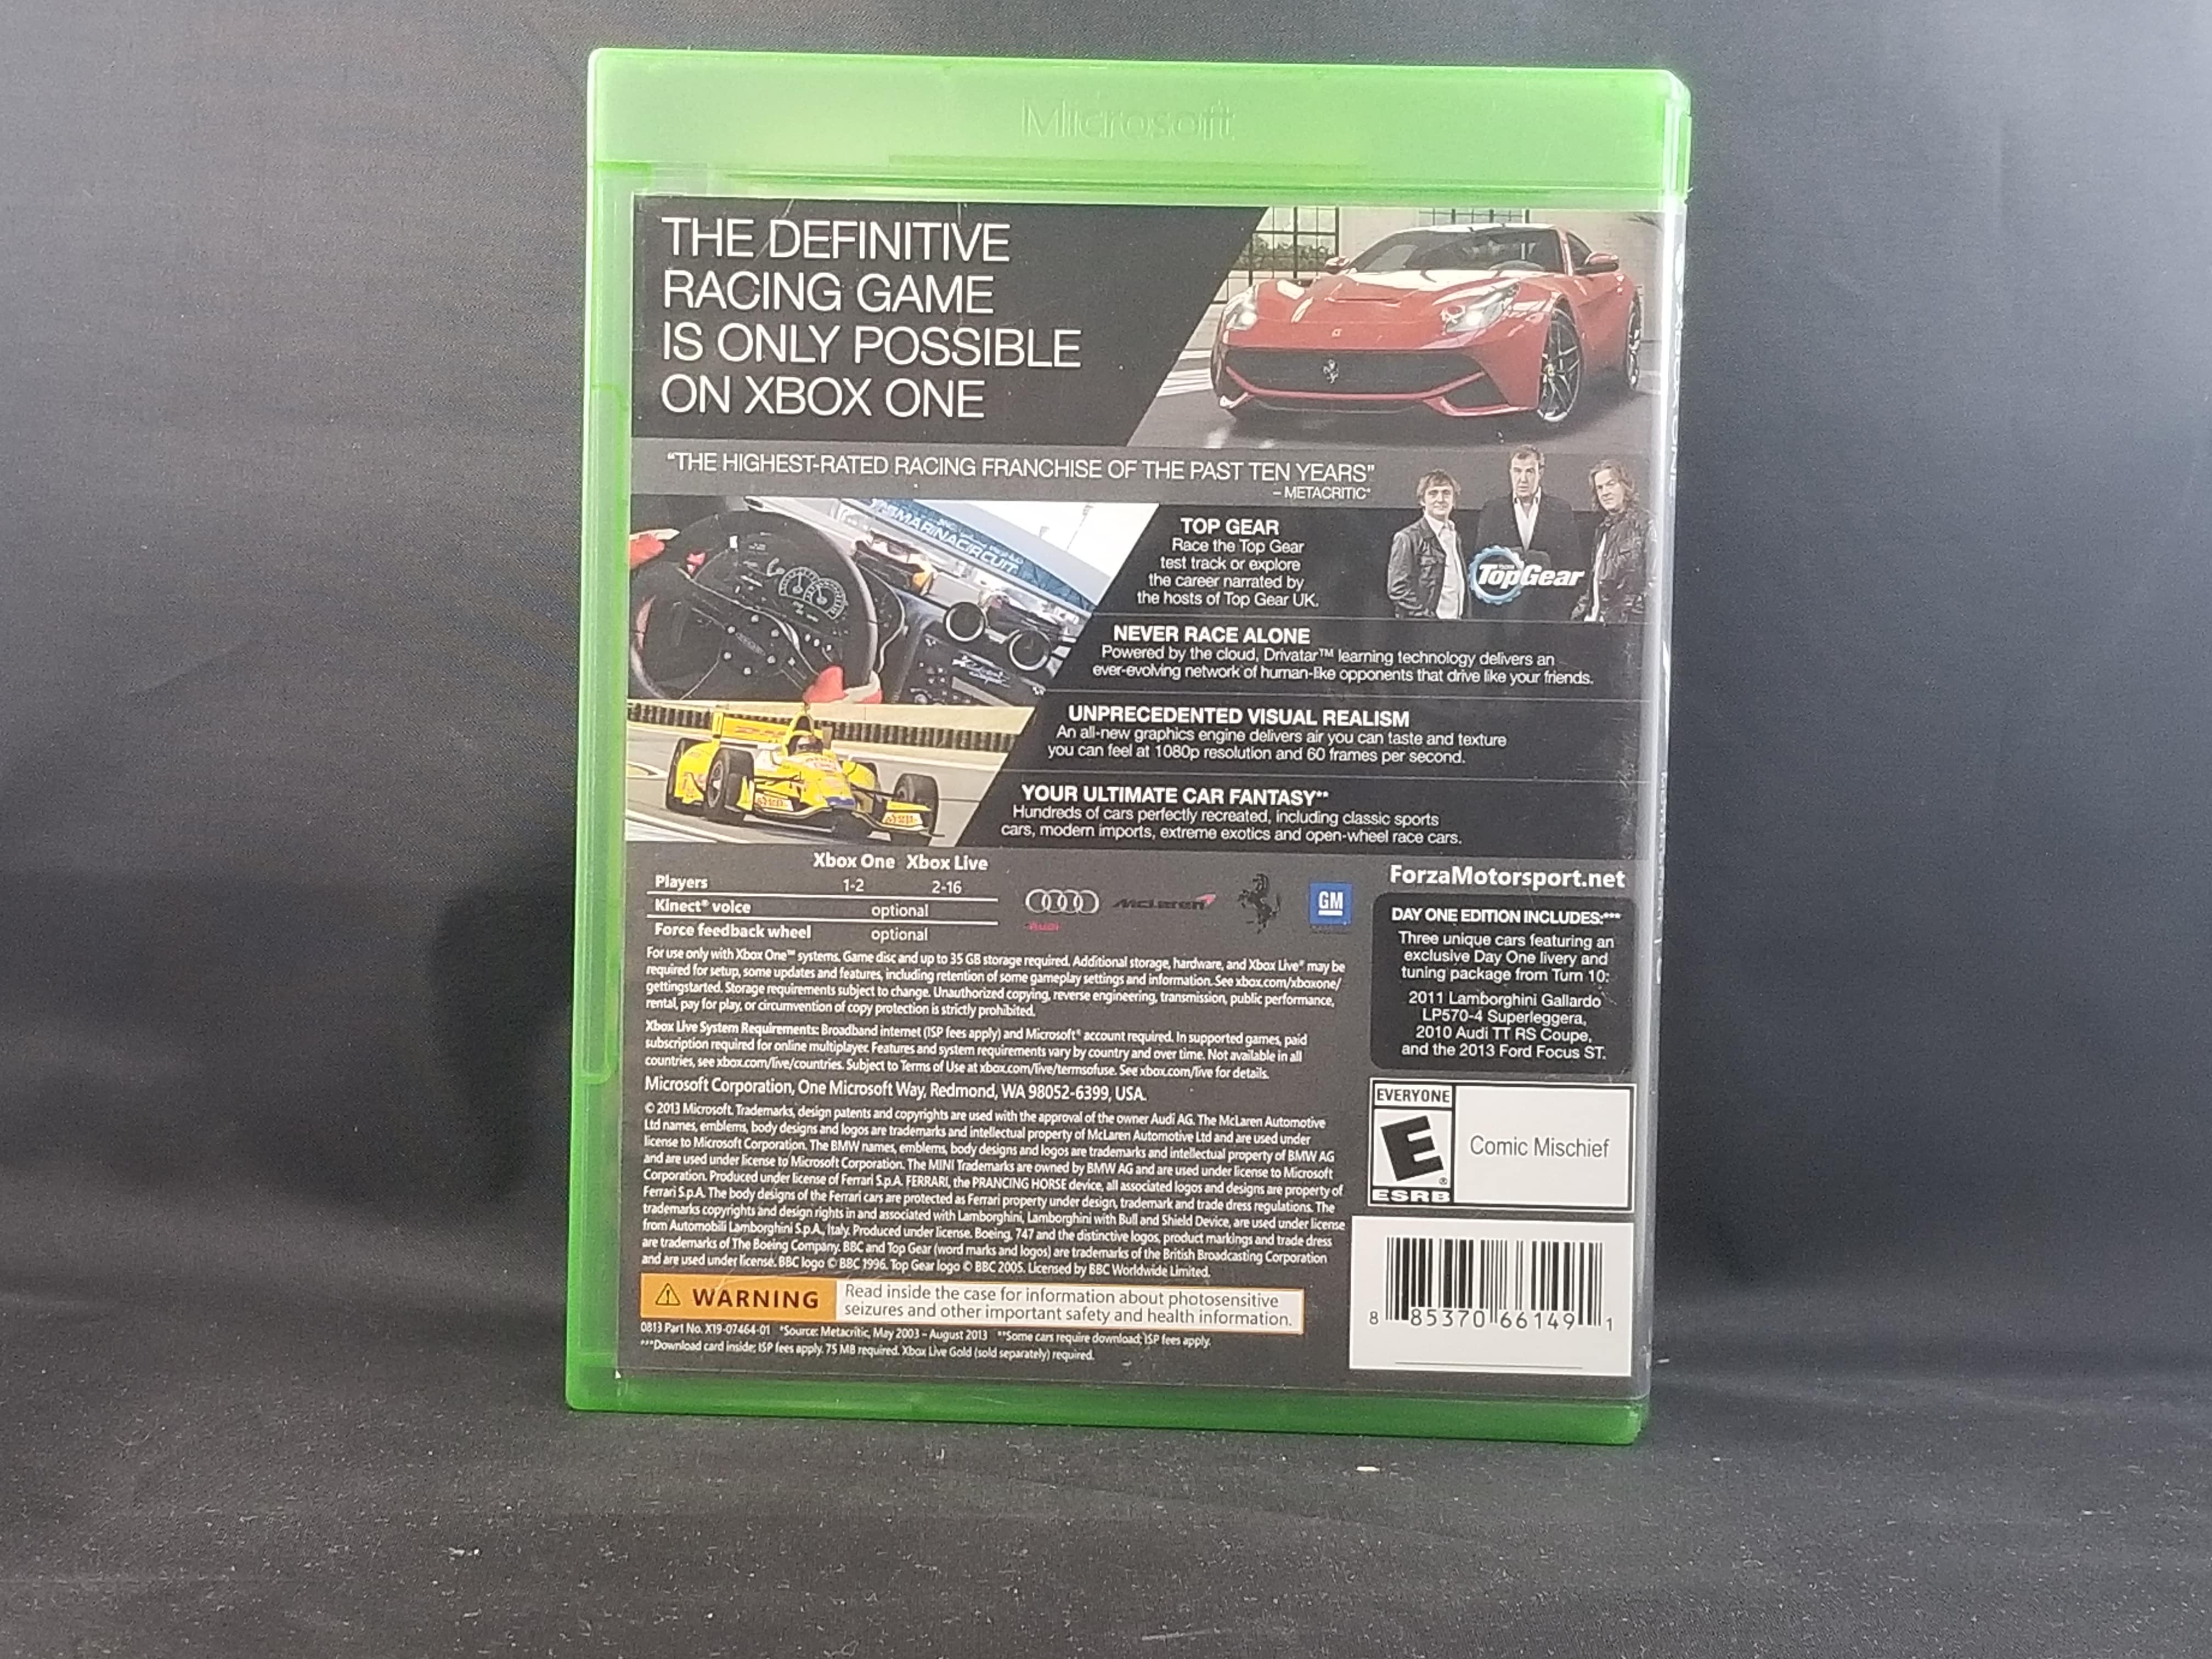 Forza Motorsport 5: Day One Edition (Xbox One)